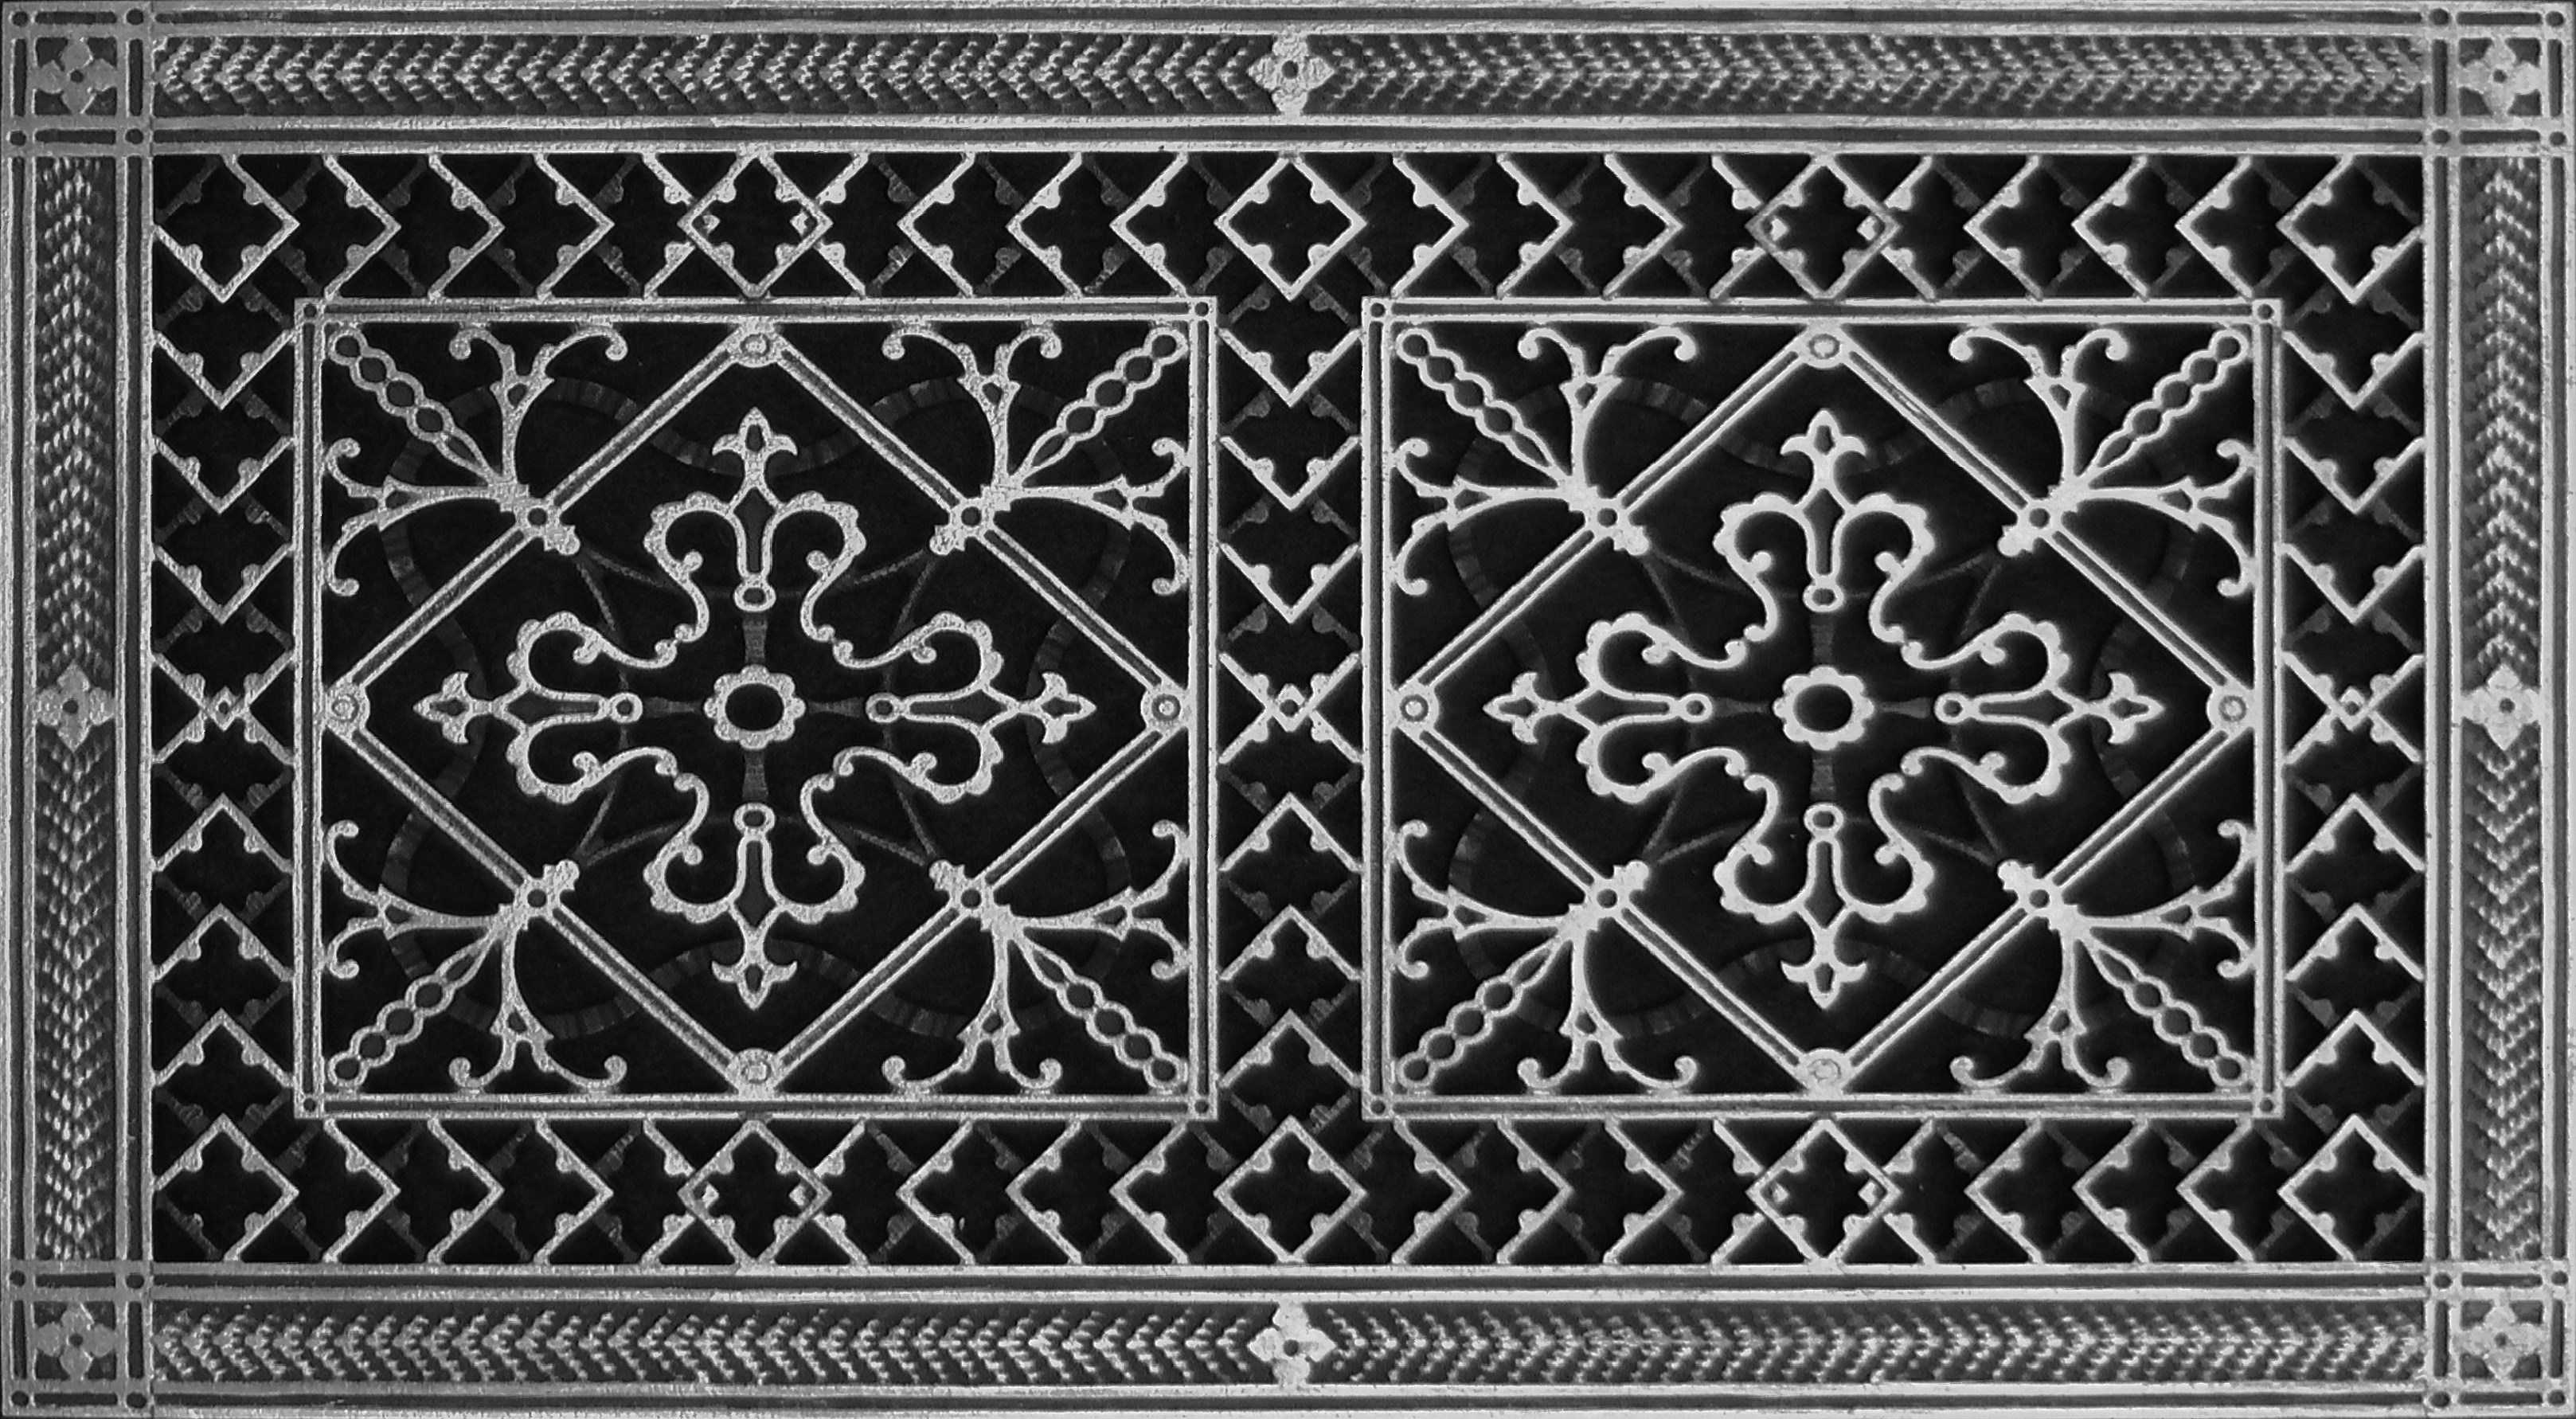 Decorative Vent Cover 10x20 Arts and Crafts Style in Pewter